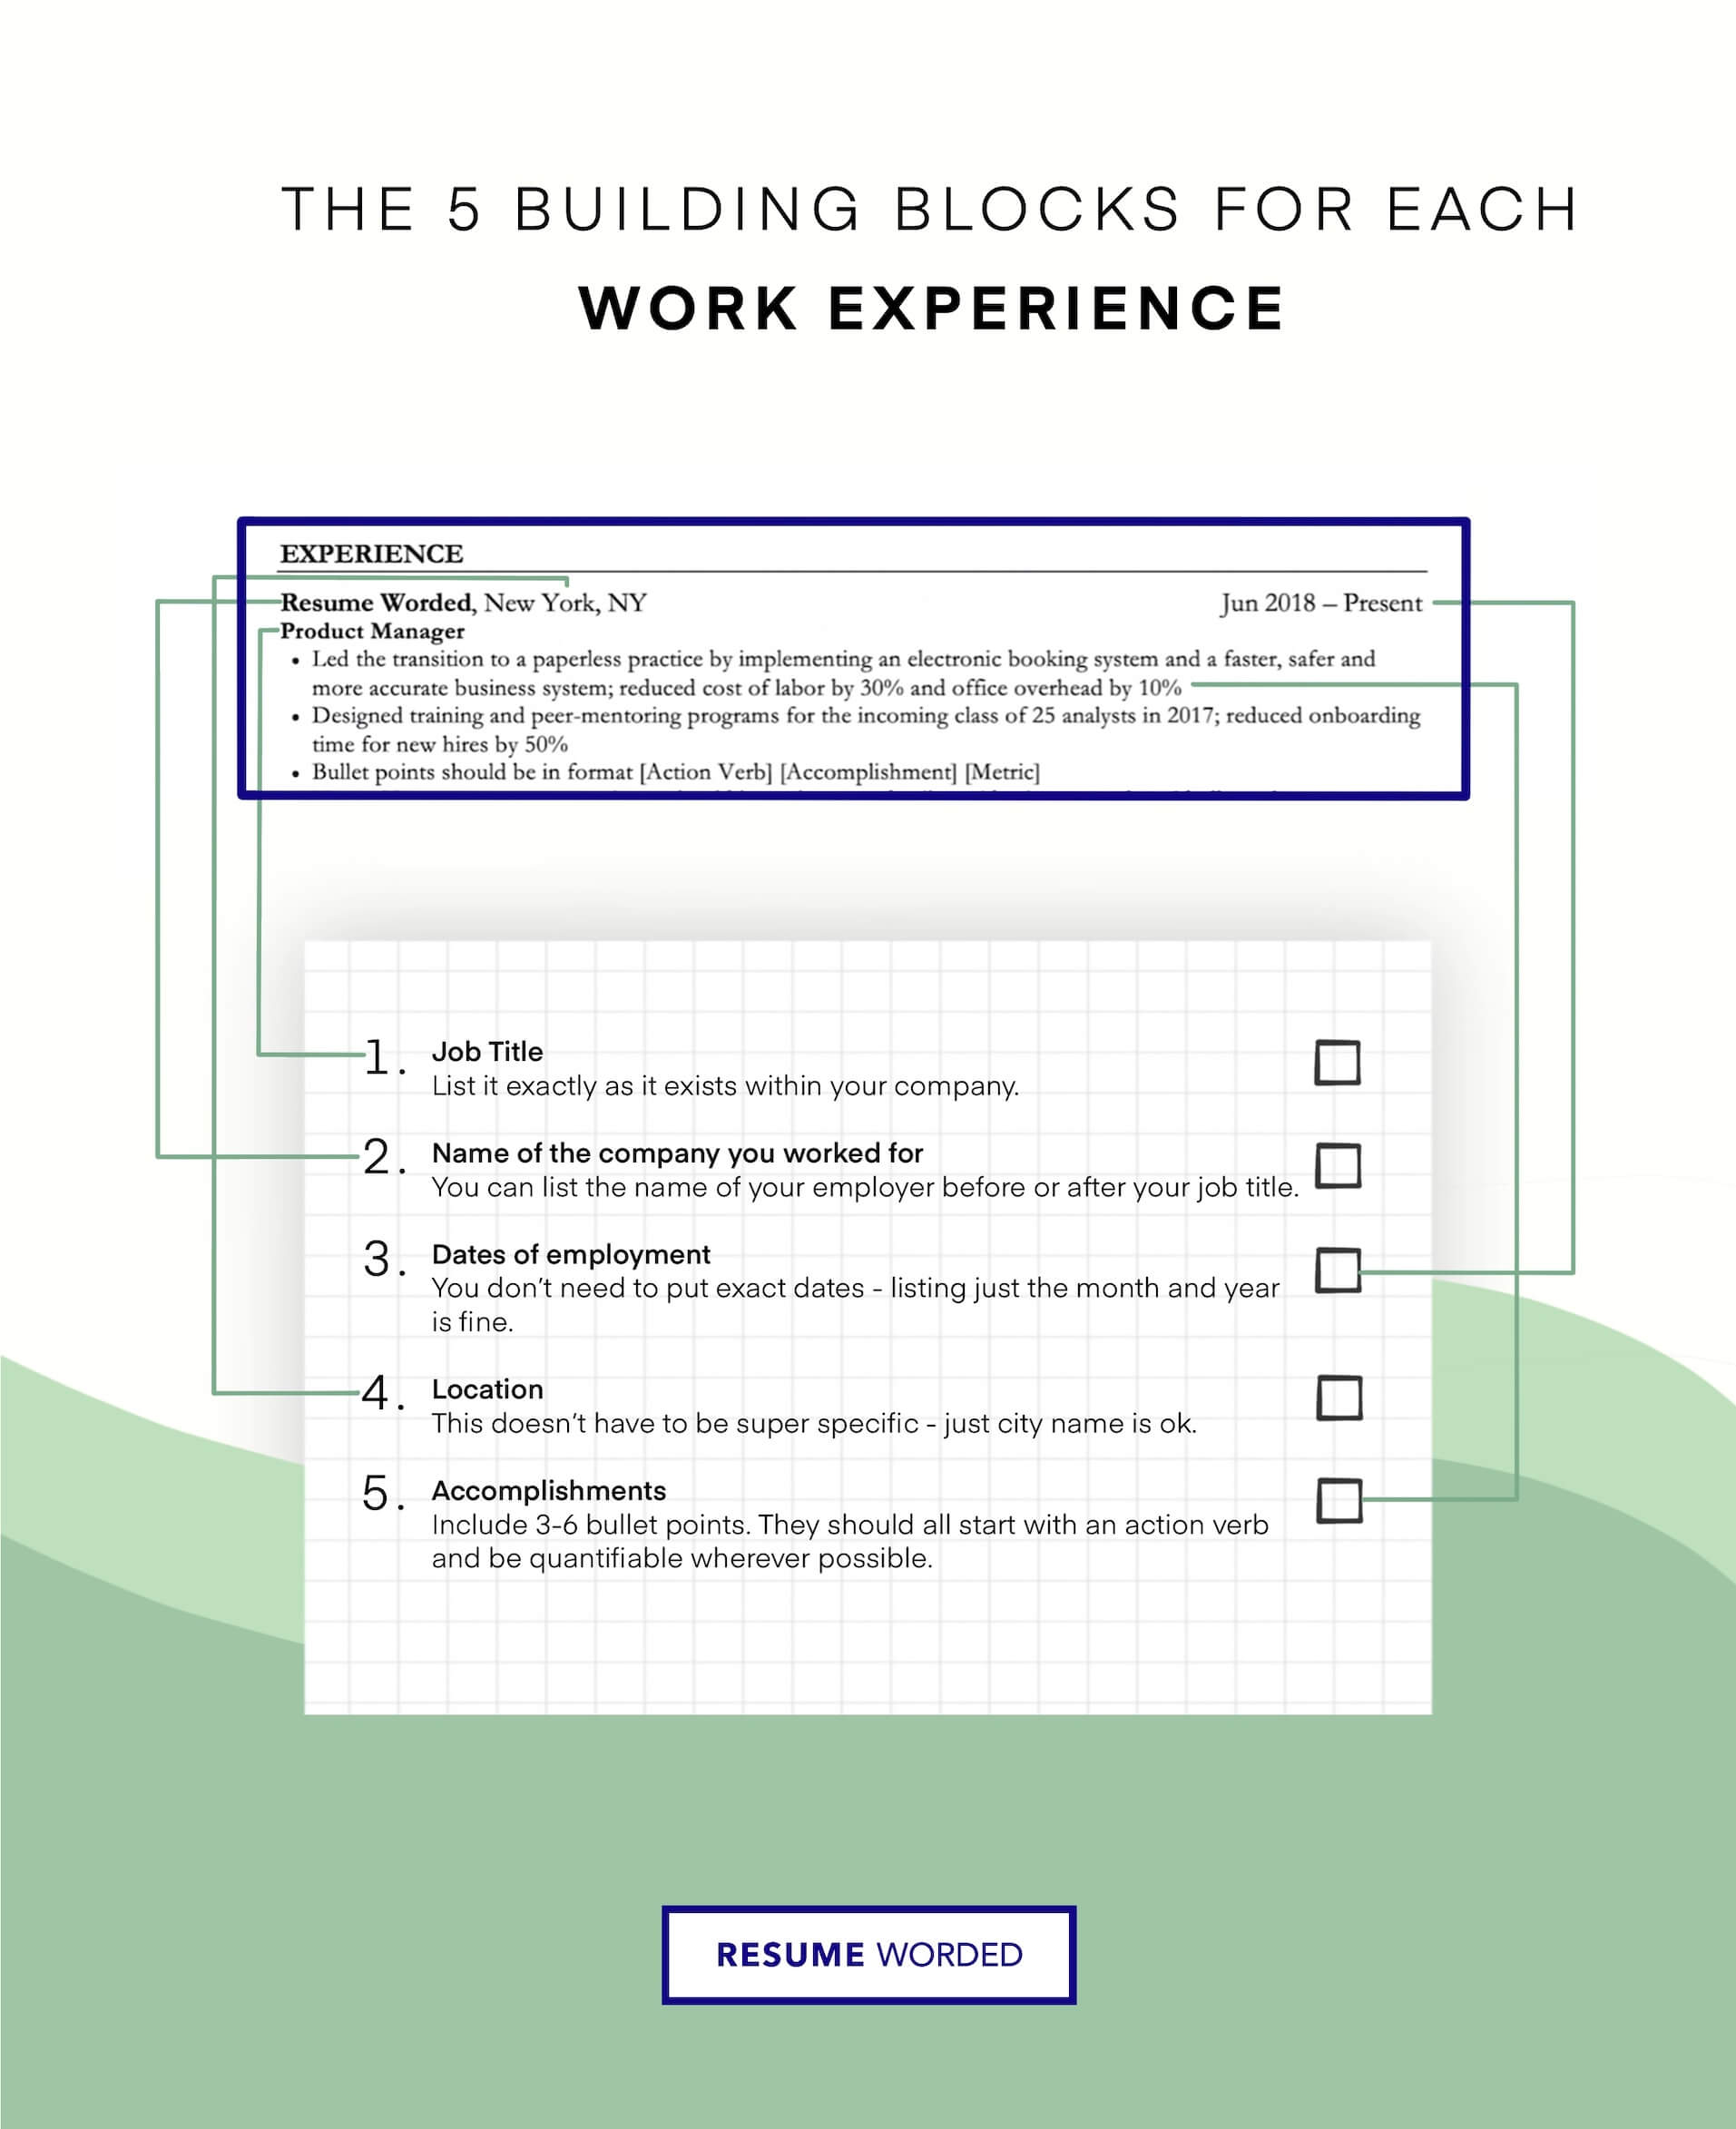 Detail your experience with subscription models - SaaS Sales Manager CV